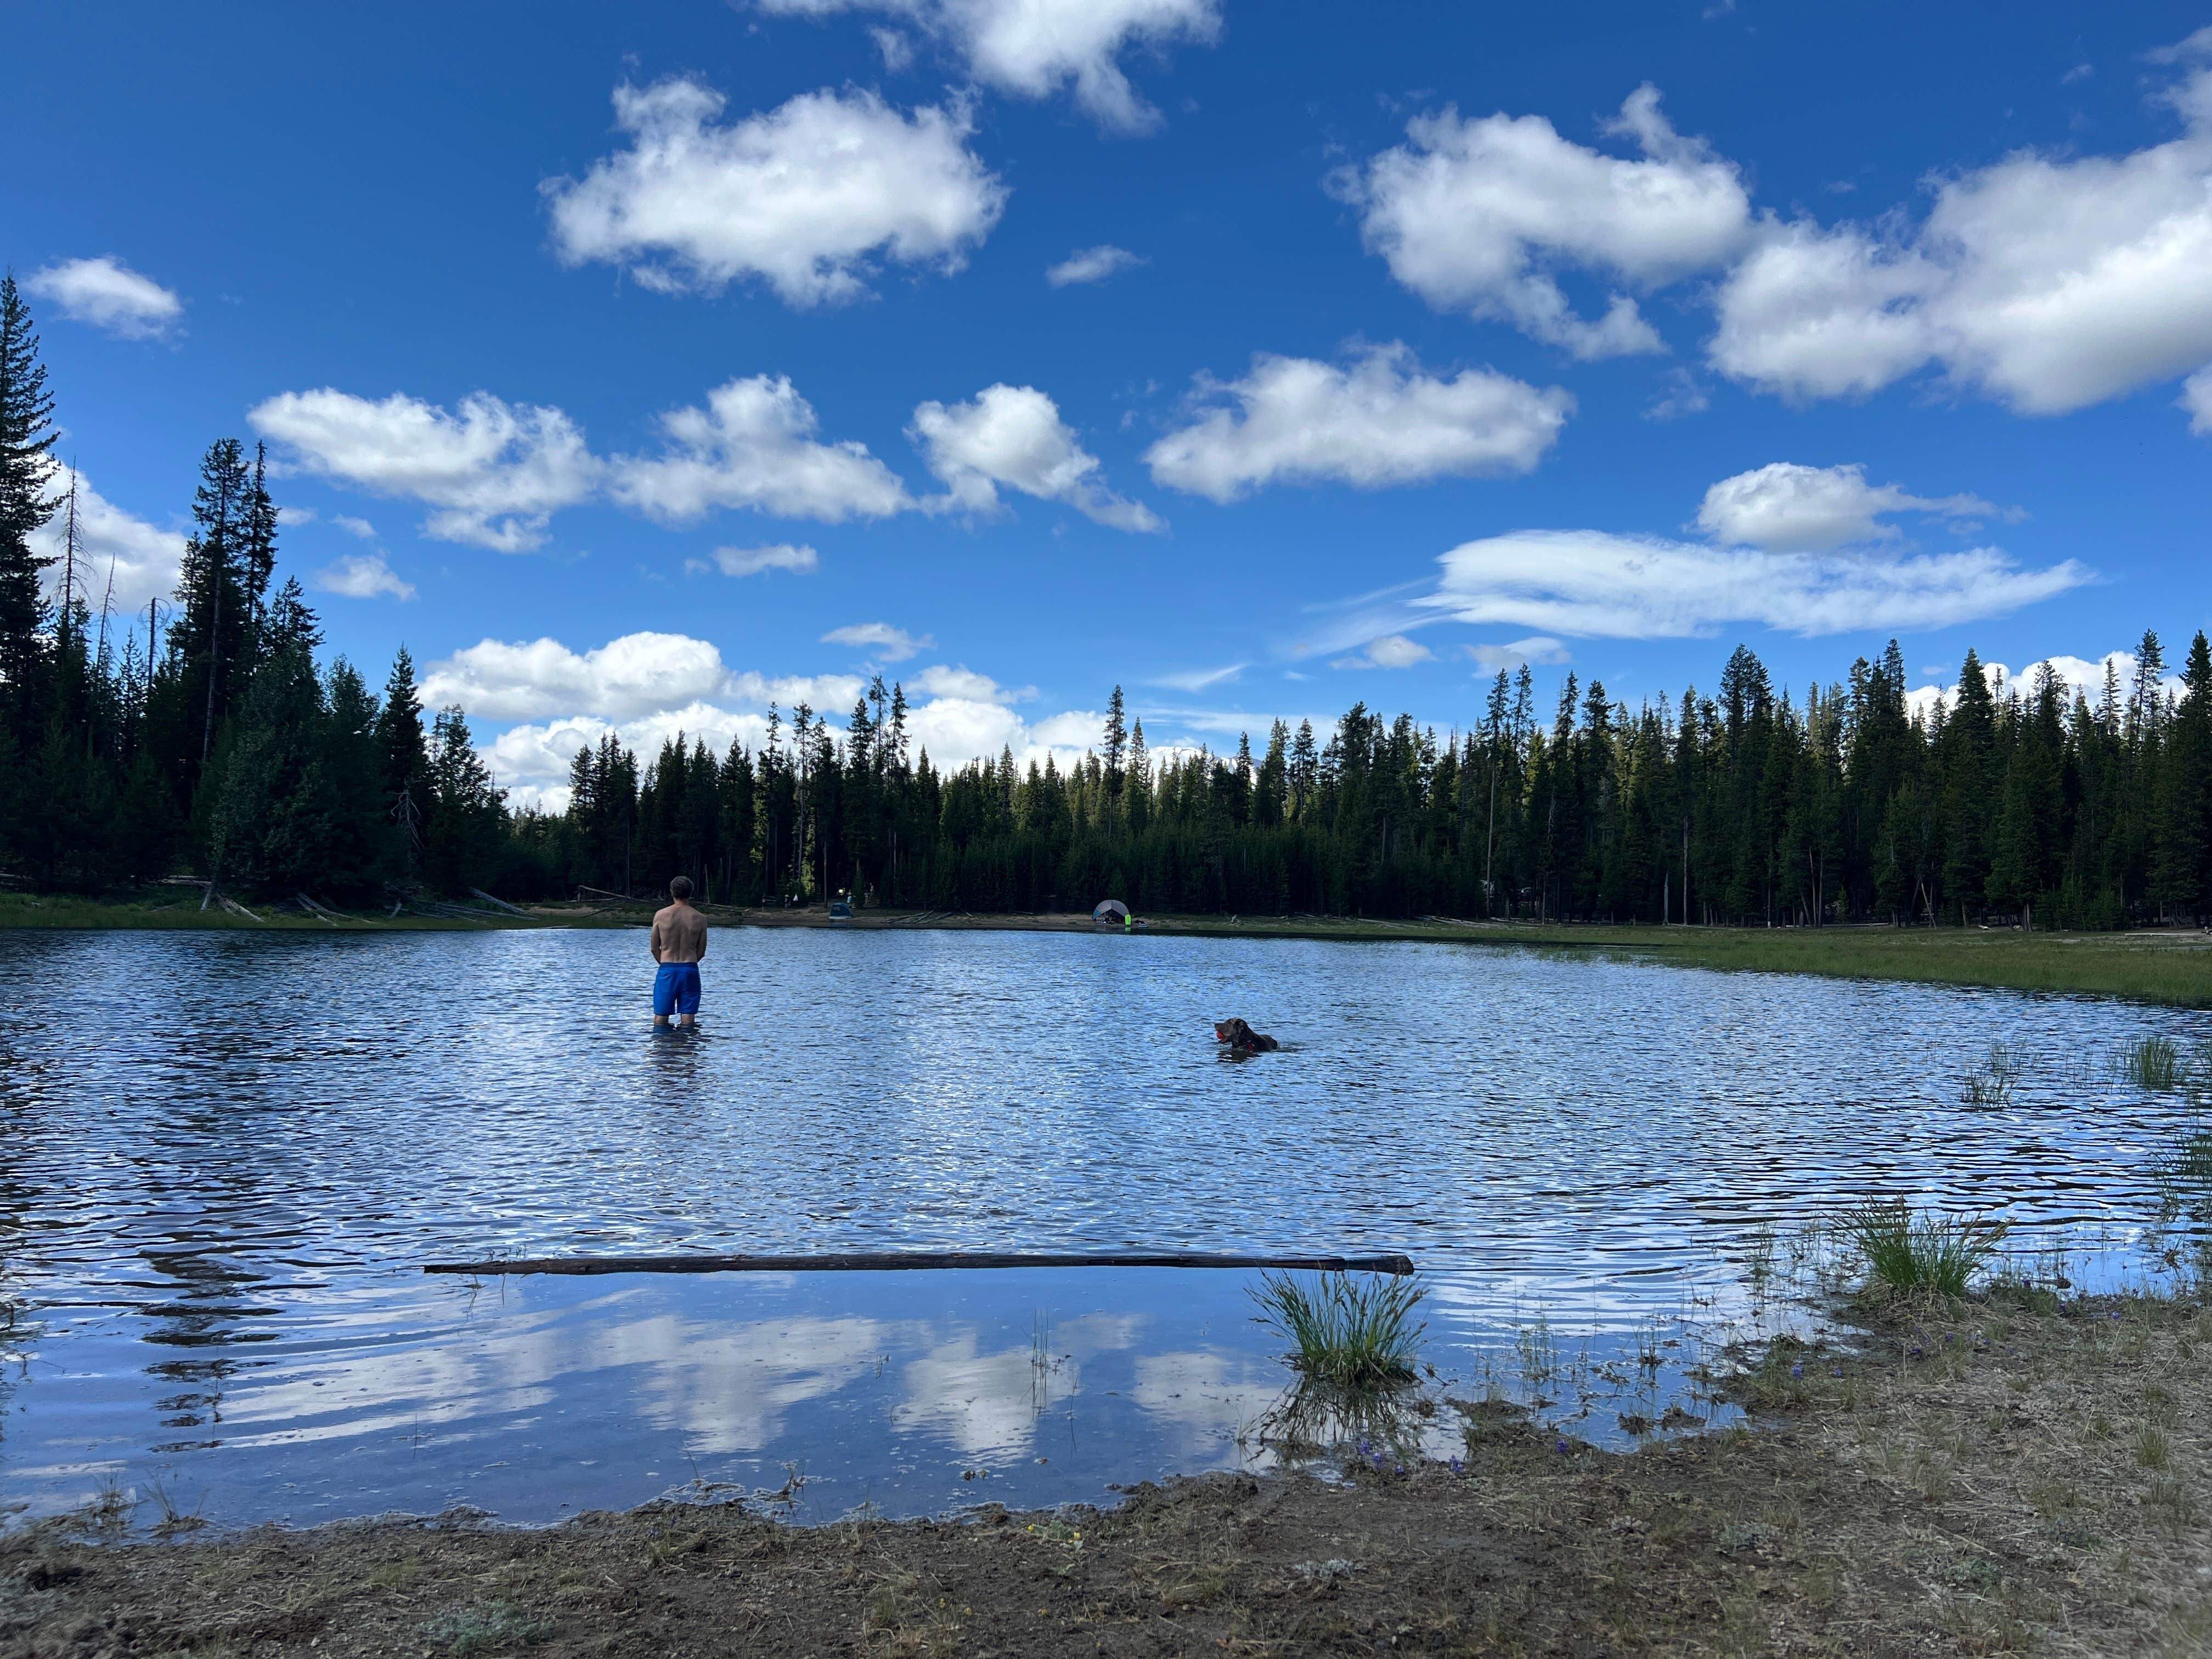 Camper submitted image from The Point - Elk Lake - 5